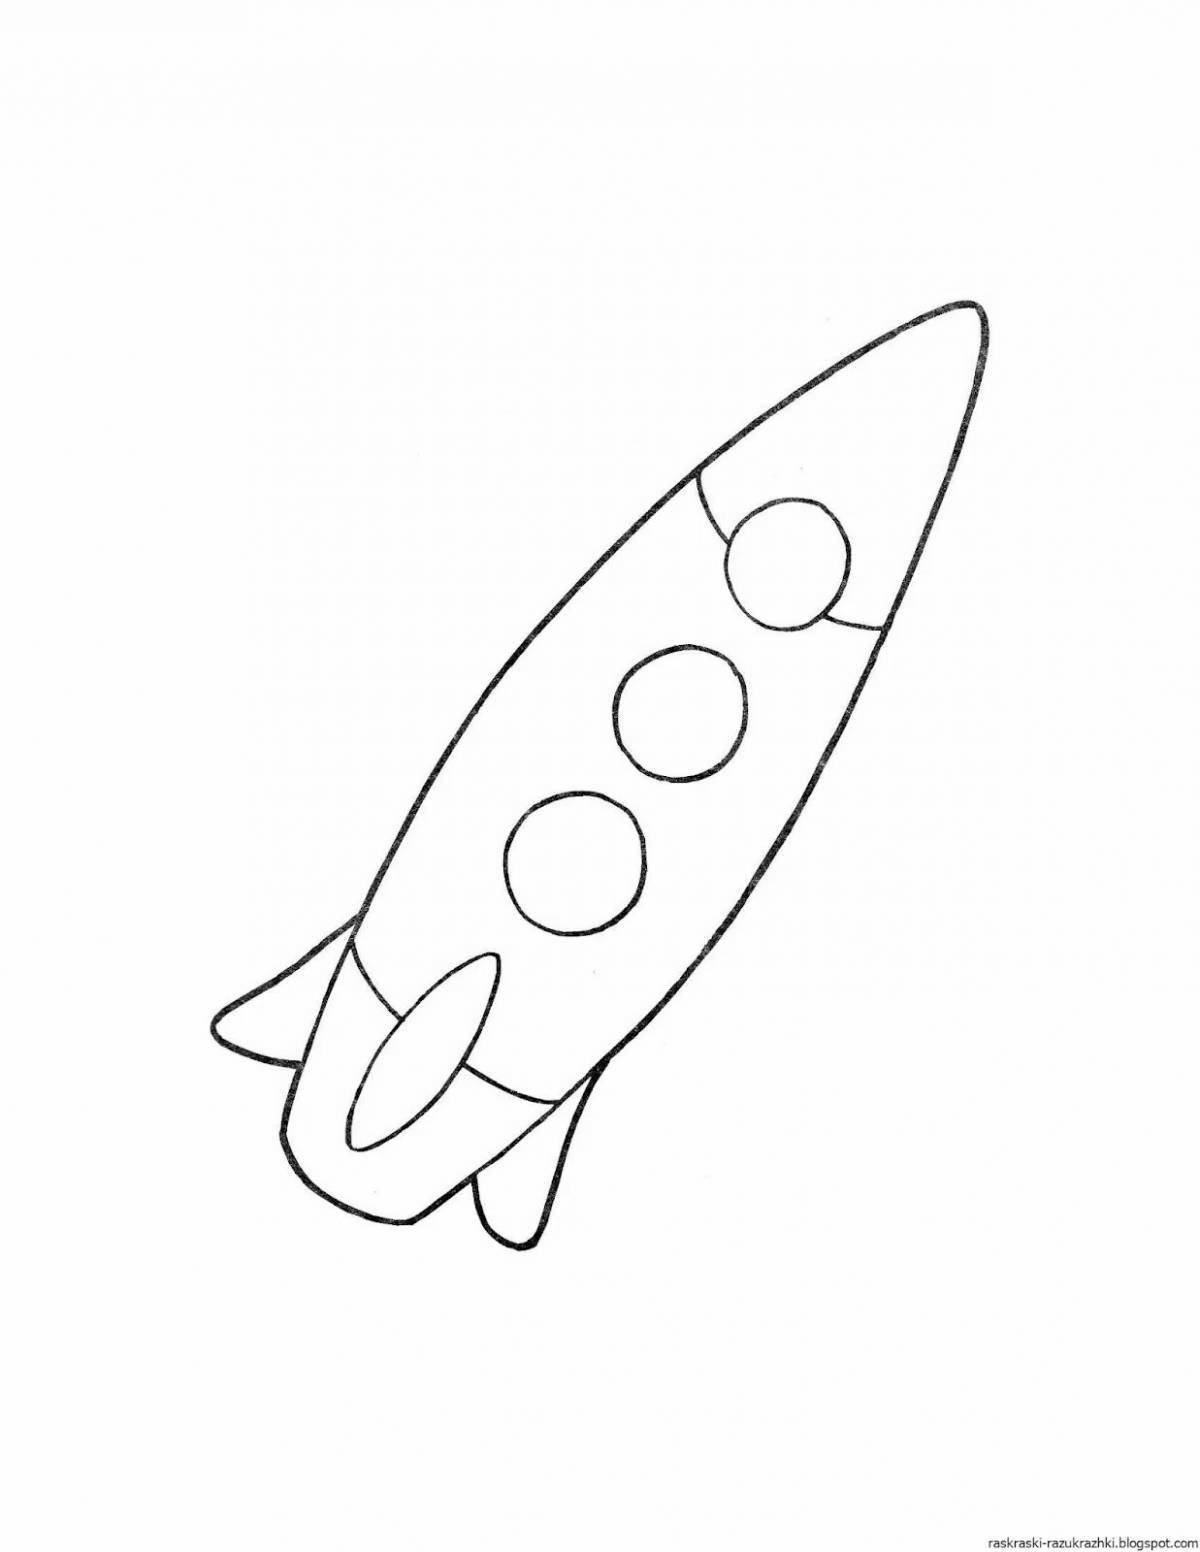 Exquisite rocket coloring book for kids